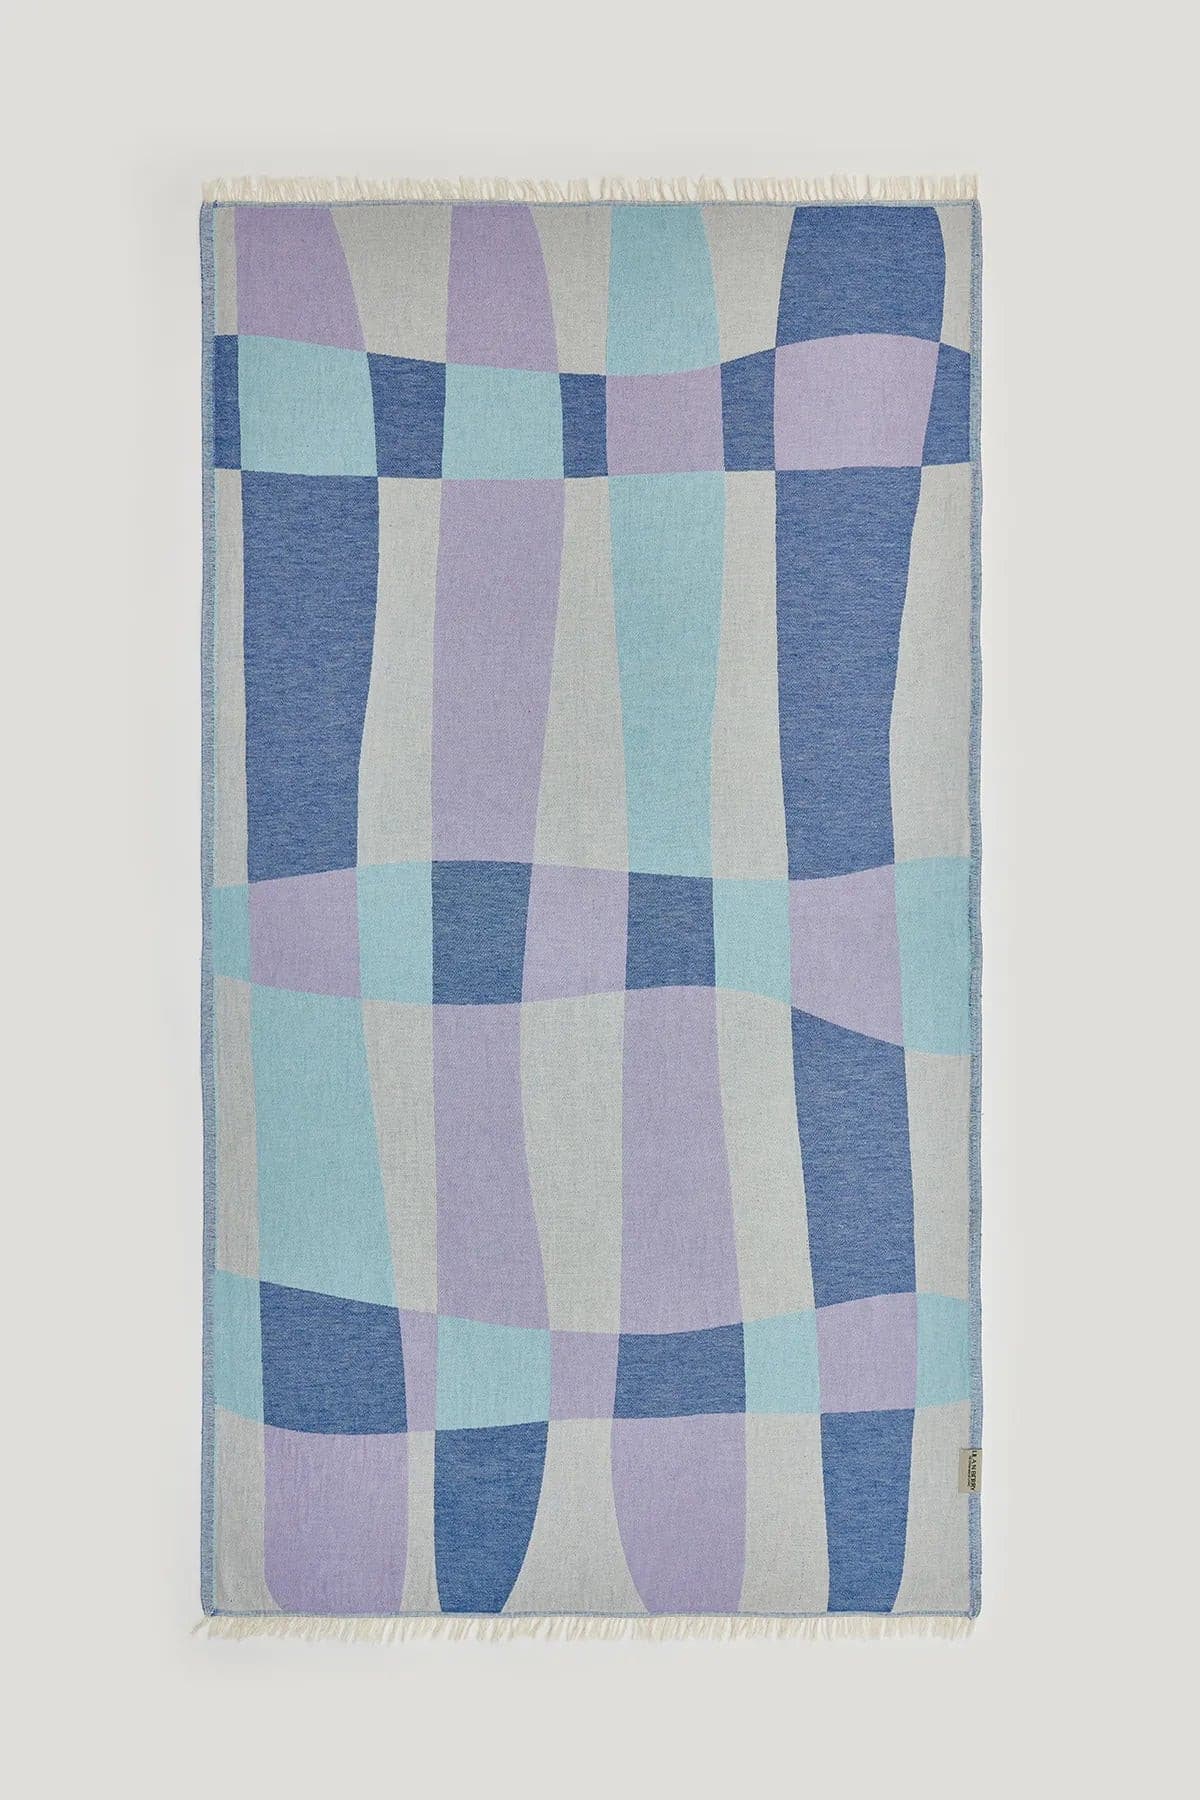 Beach/Bath,living place,Mellow Indigo,Turkish towel,Front side,summer,line patterned,double-faces,purified sand,light,compact, easy pack,fun, recycled,fun,multi color